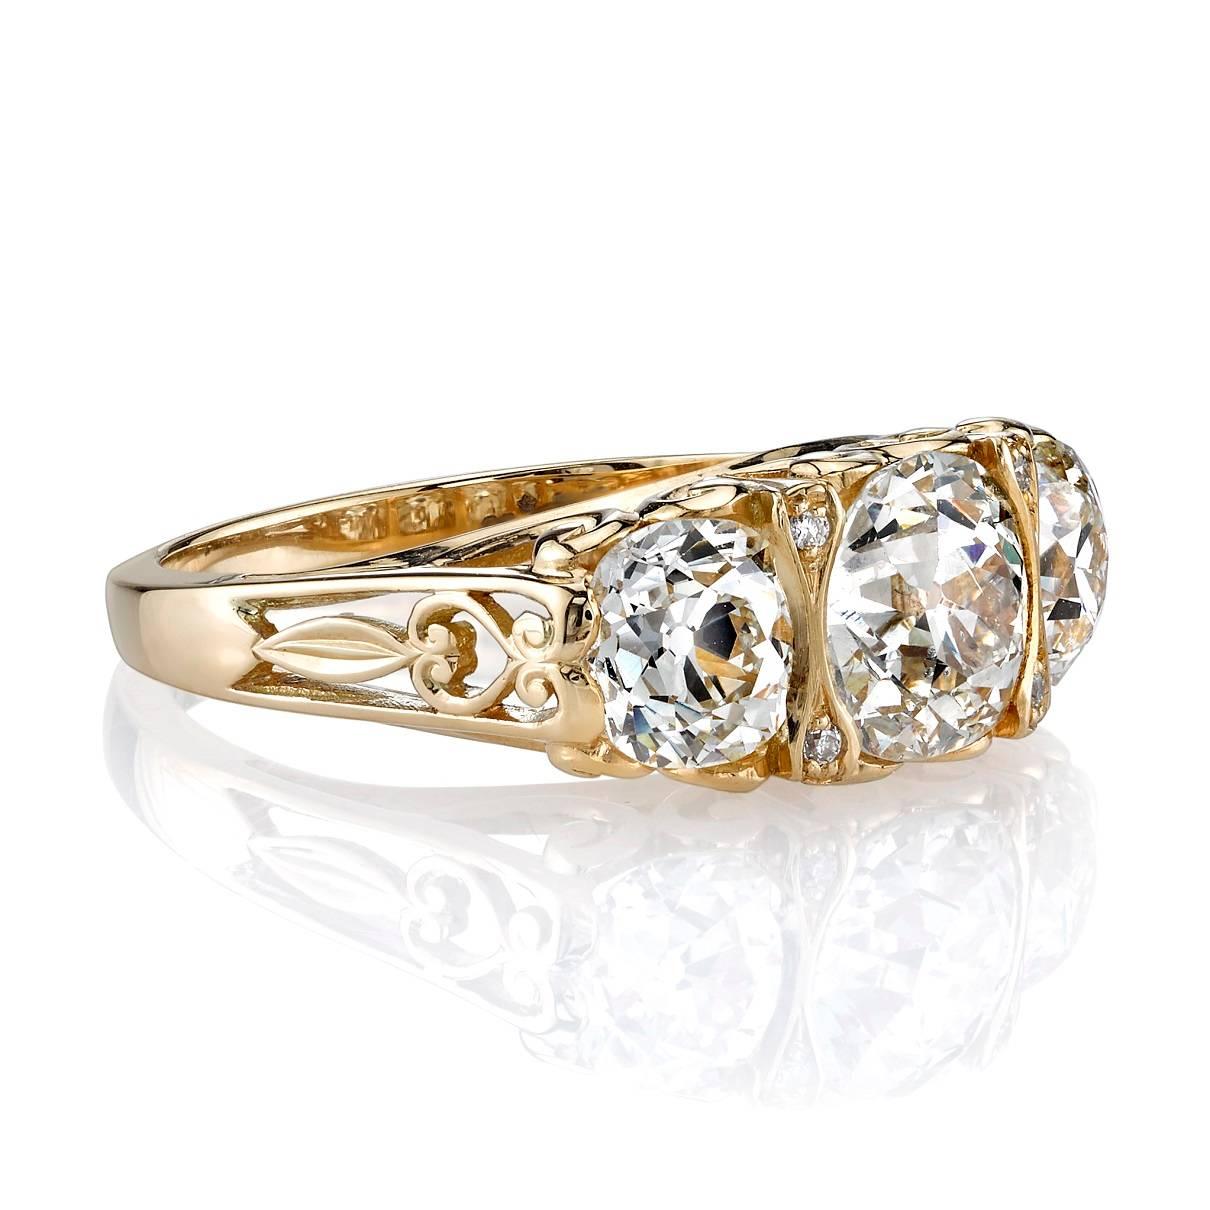 1.47ct J/SI2 vintage Cushion cut diamond with 1.54ctw vintage cushion cut accent stones set in a handcrafted 18K yellow gold three stone mounting. This ring features beautiful scroll work and intricate side detail. 